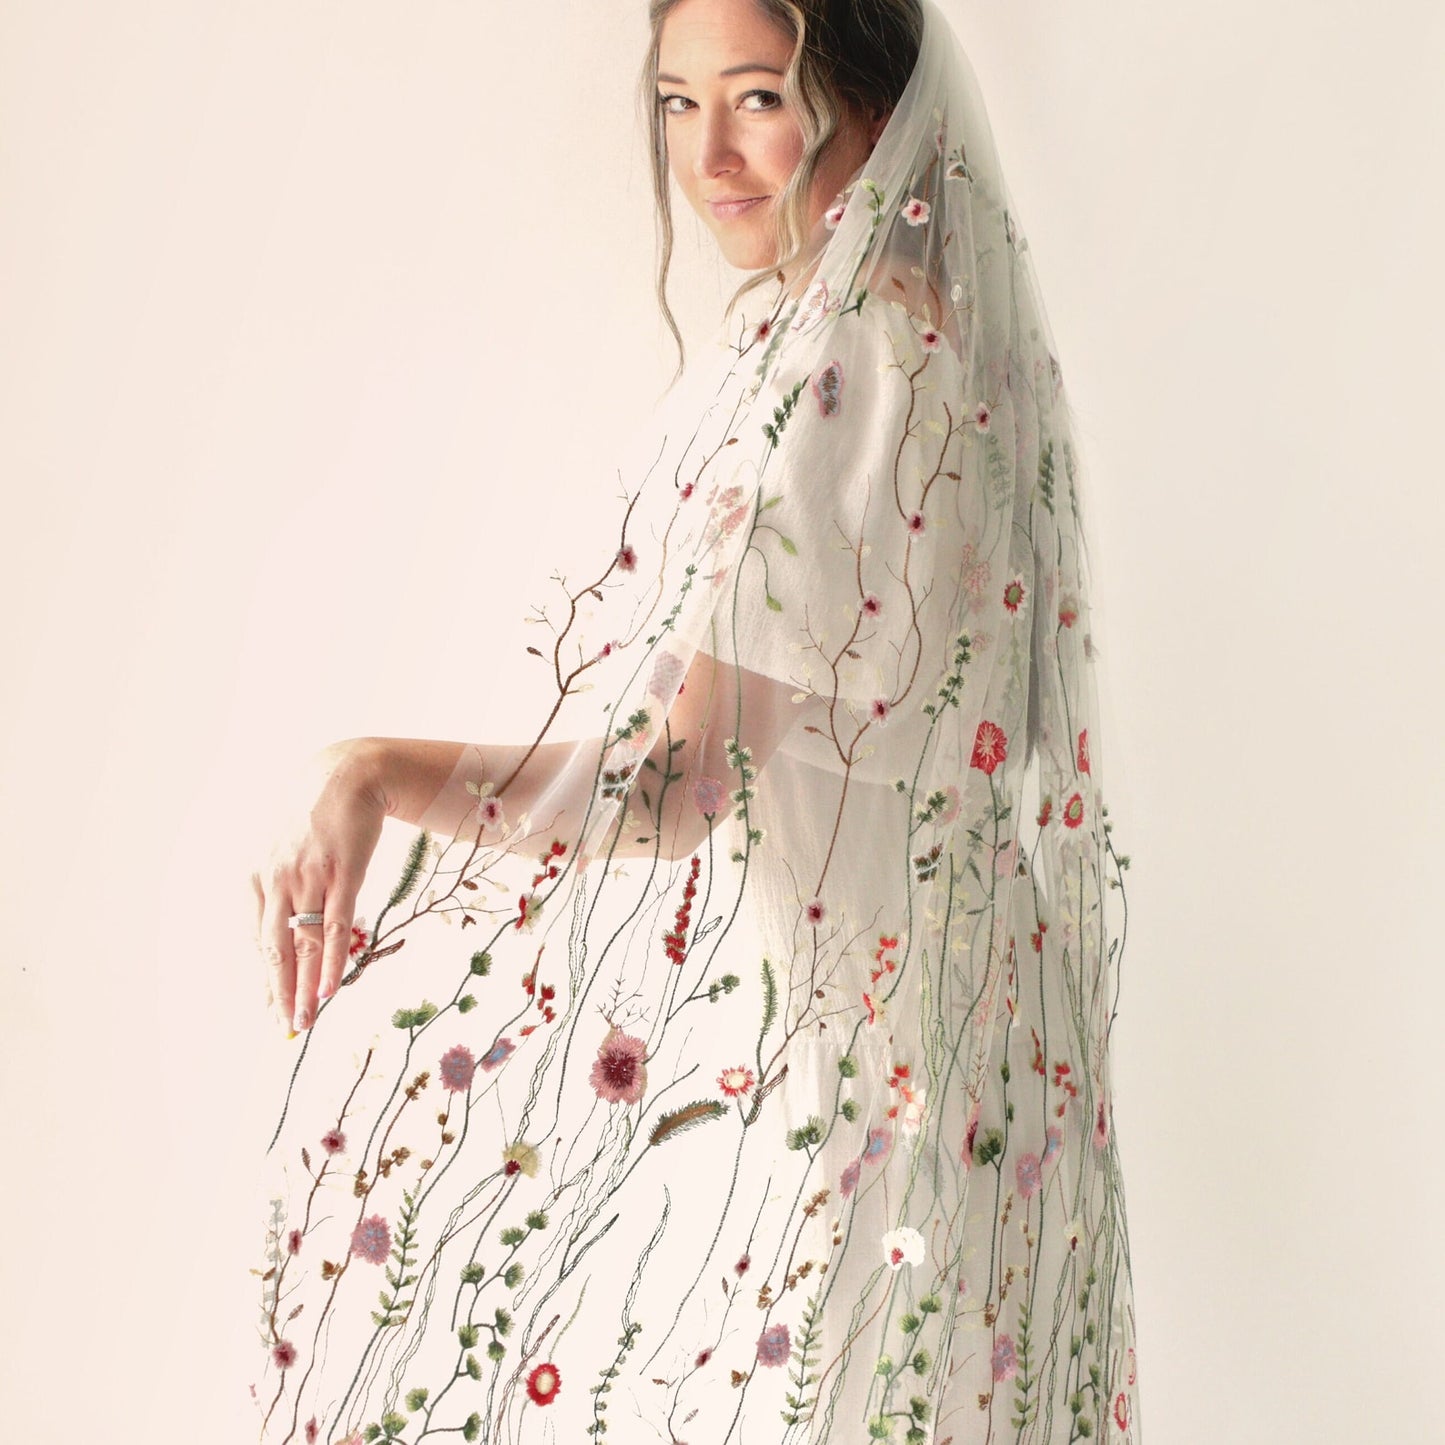 Wildflower embroidered floral veil, Longer style